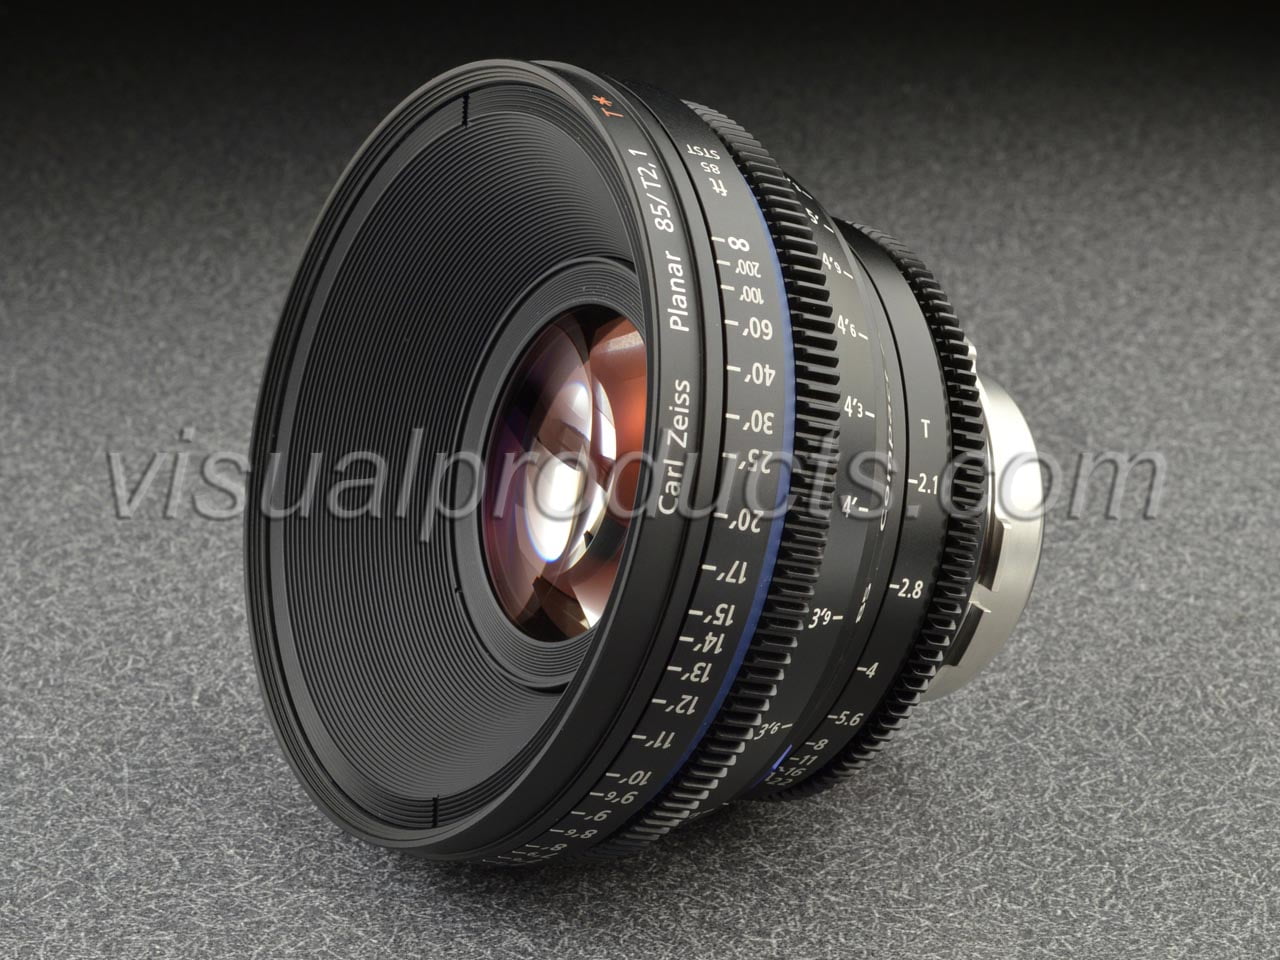 Zeiss Compact Prime CP.2 85mm f/2.1 T* Lens with MFT(Micro Four Thirds)  Mount